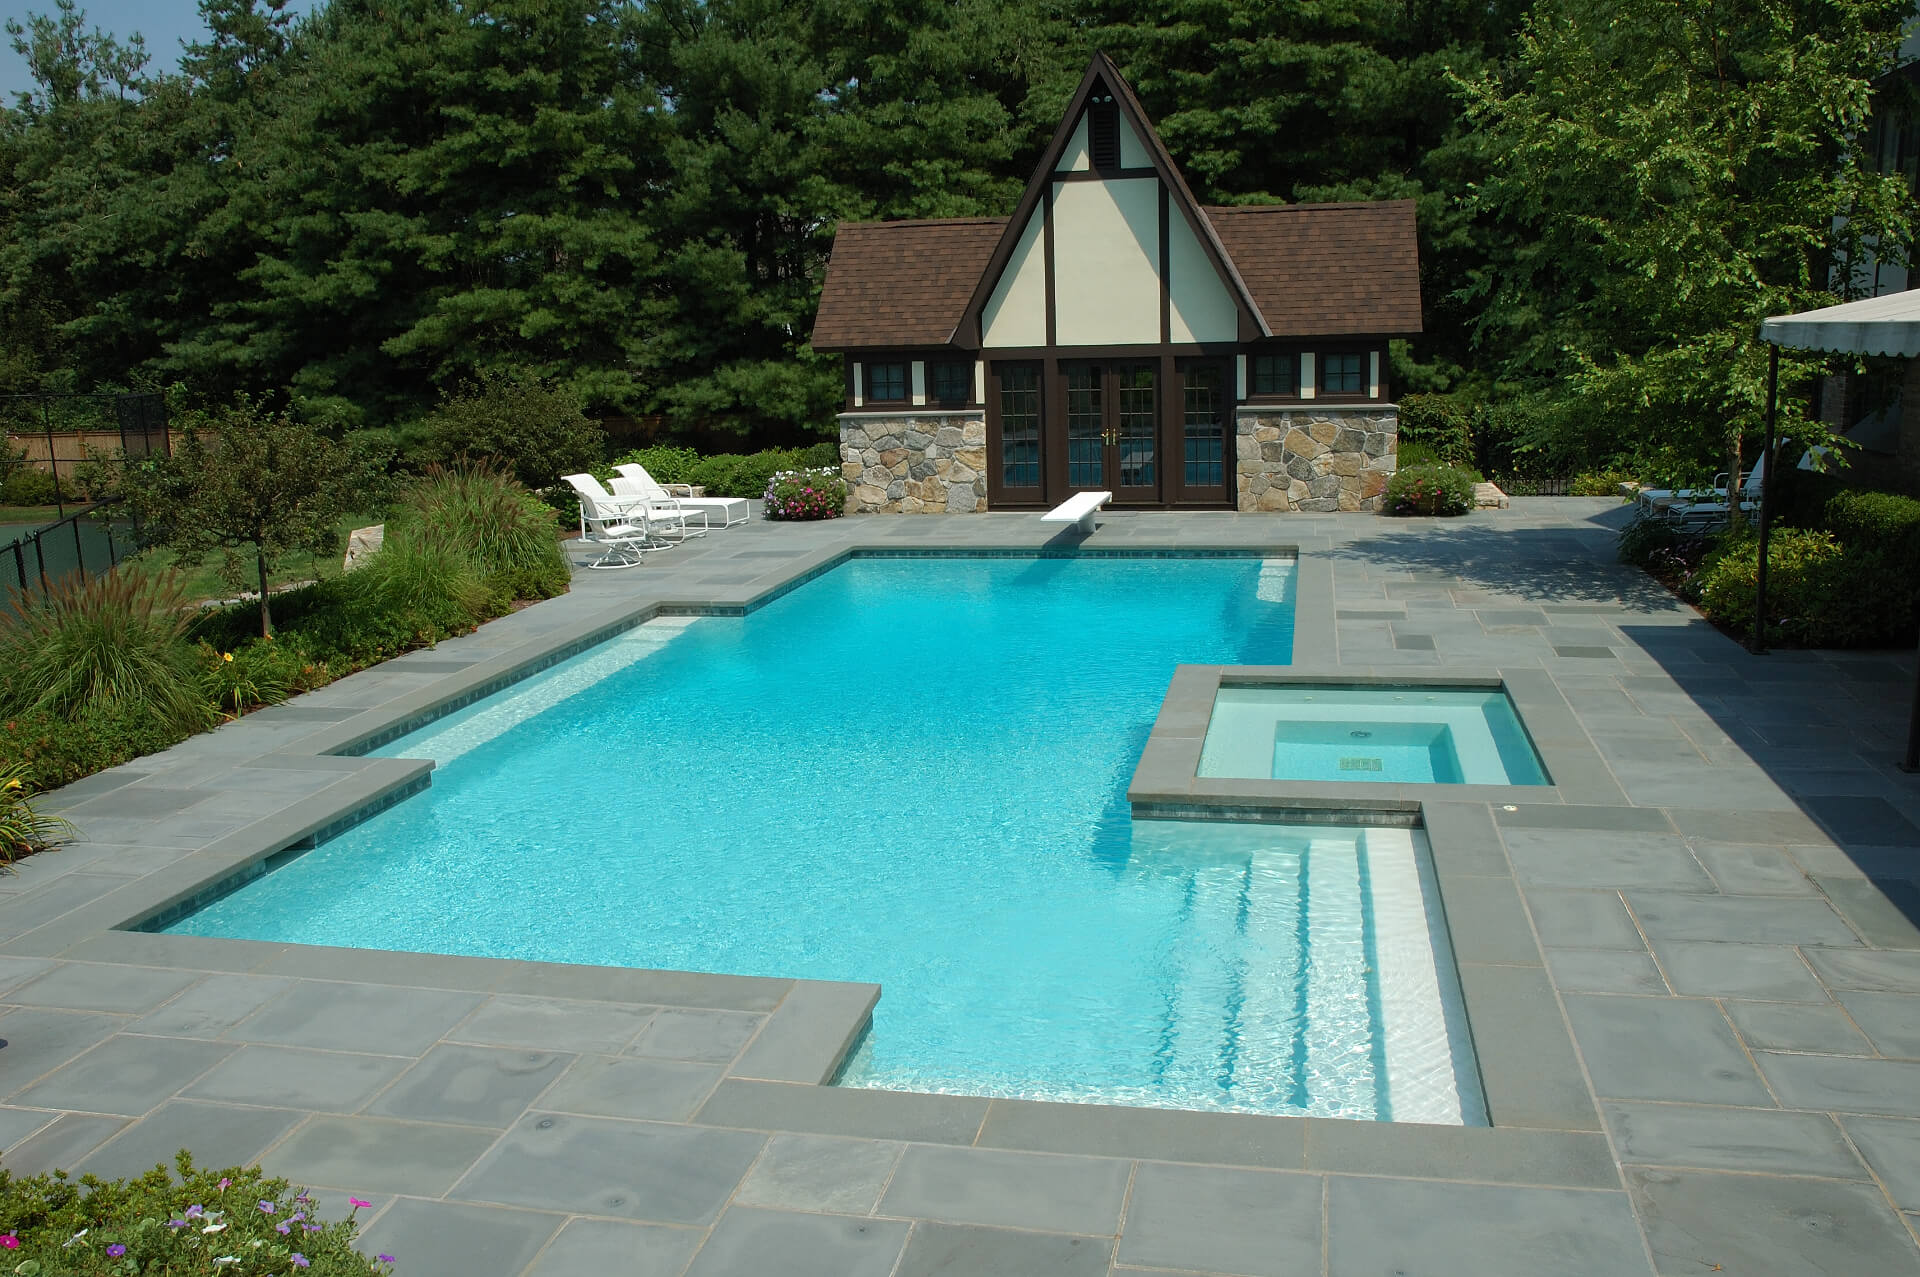 Swimming Pool Tiles Last Sline Pools, Can You Use Any Tile In A Pool